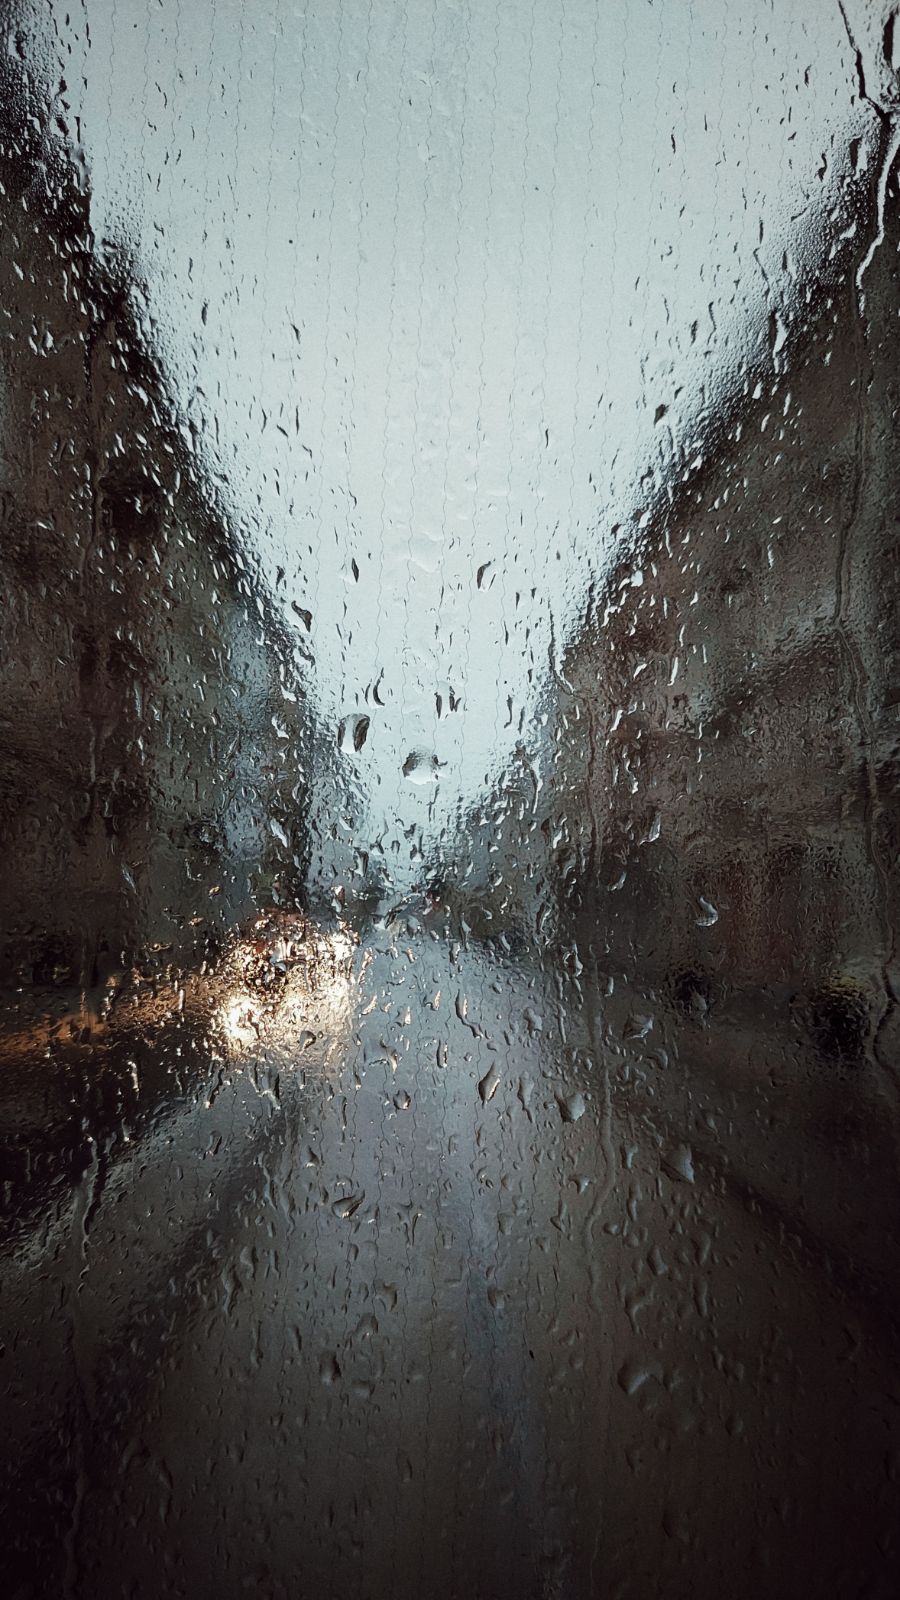 A city street seen through rainy windows. Headlights of a few cars to the left. Houses on both sides.